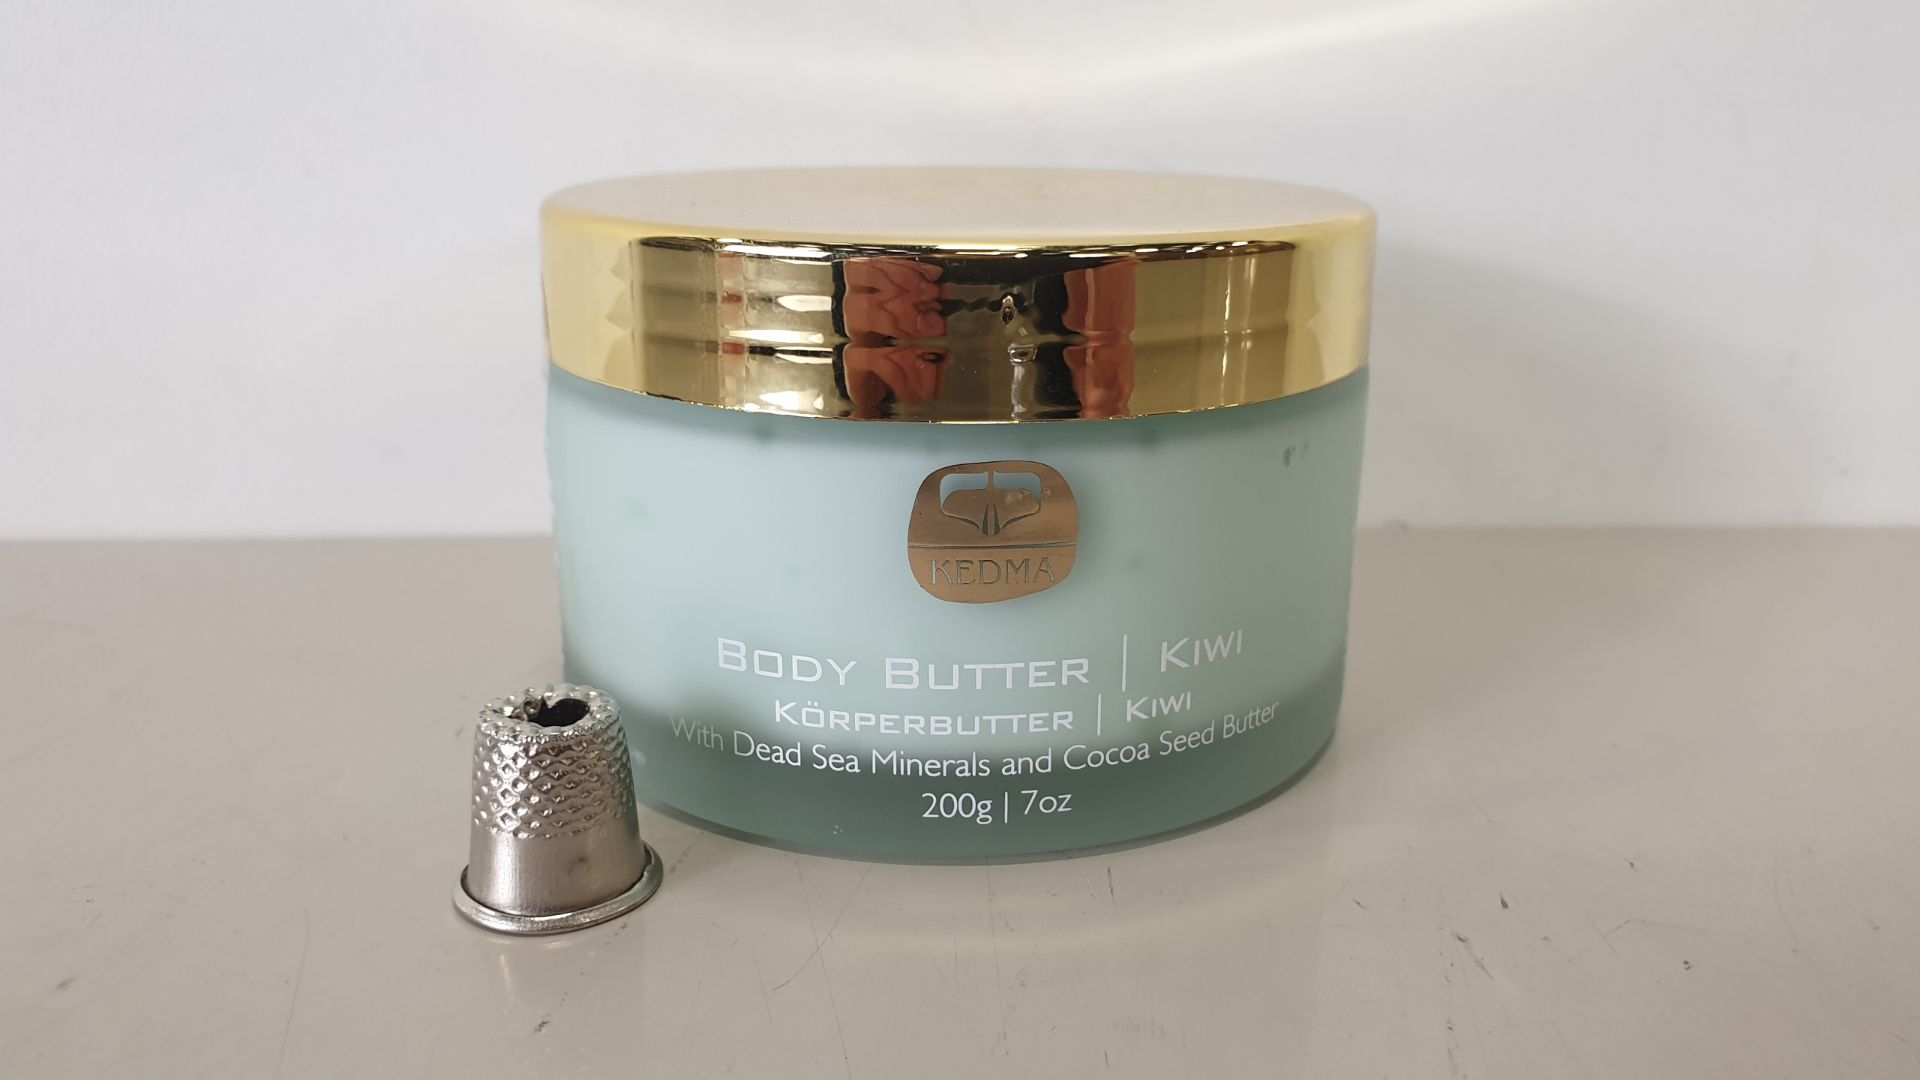 6 X BRAND NEW KEDMA BODY BUTTER / KIWI WITH DEAD SEA MINERALS AND COCOA SEED BUTTER - 200G RRP $